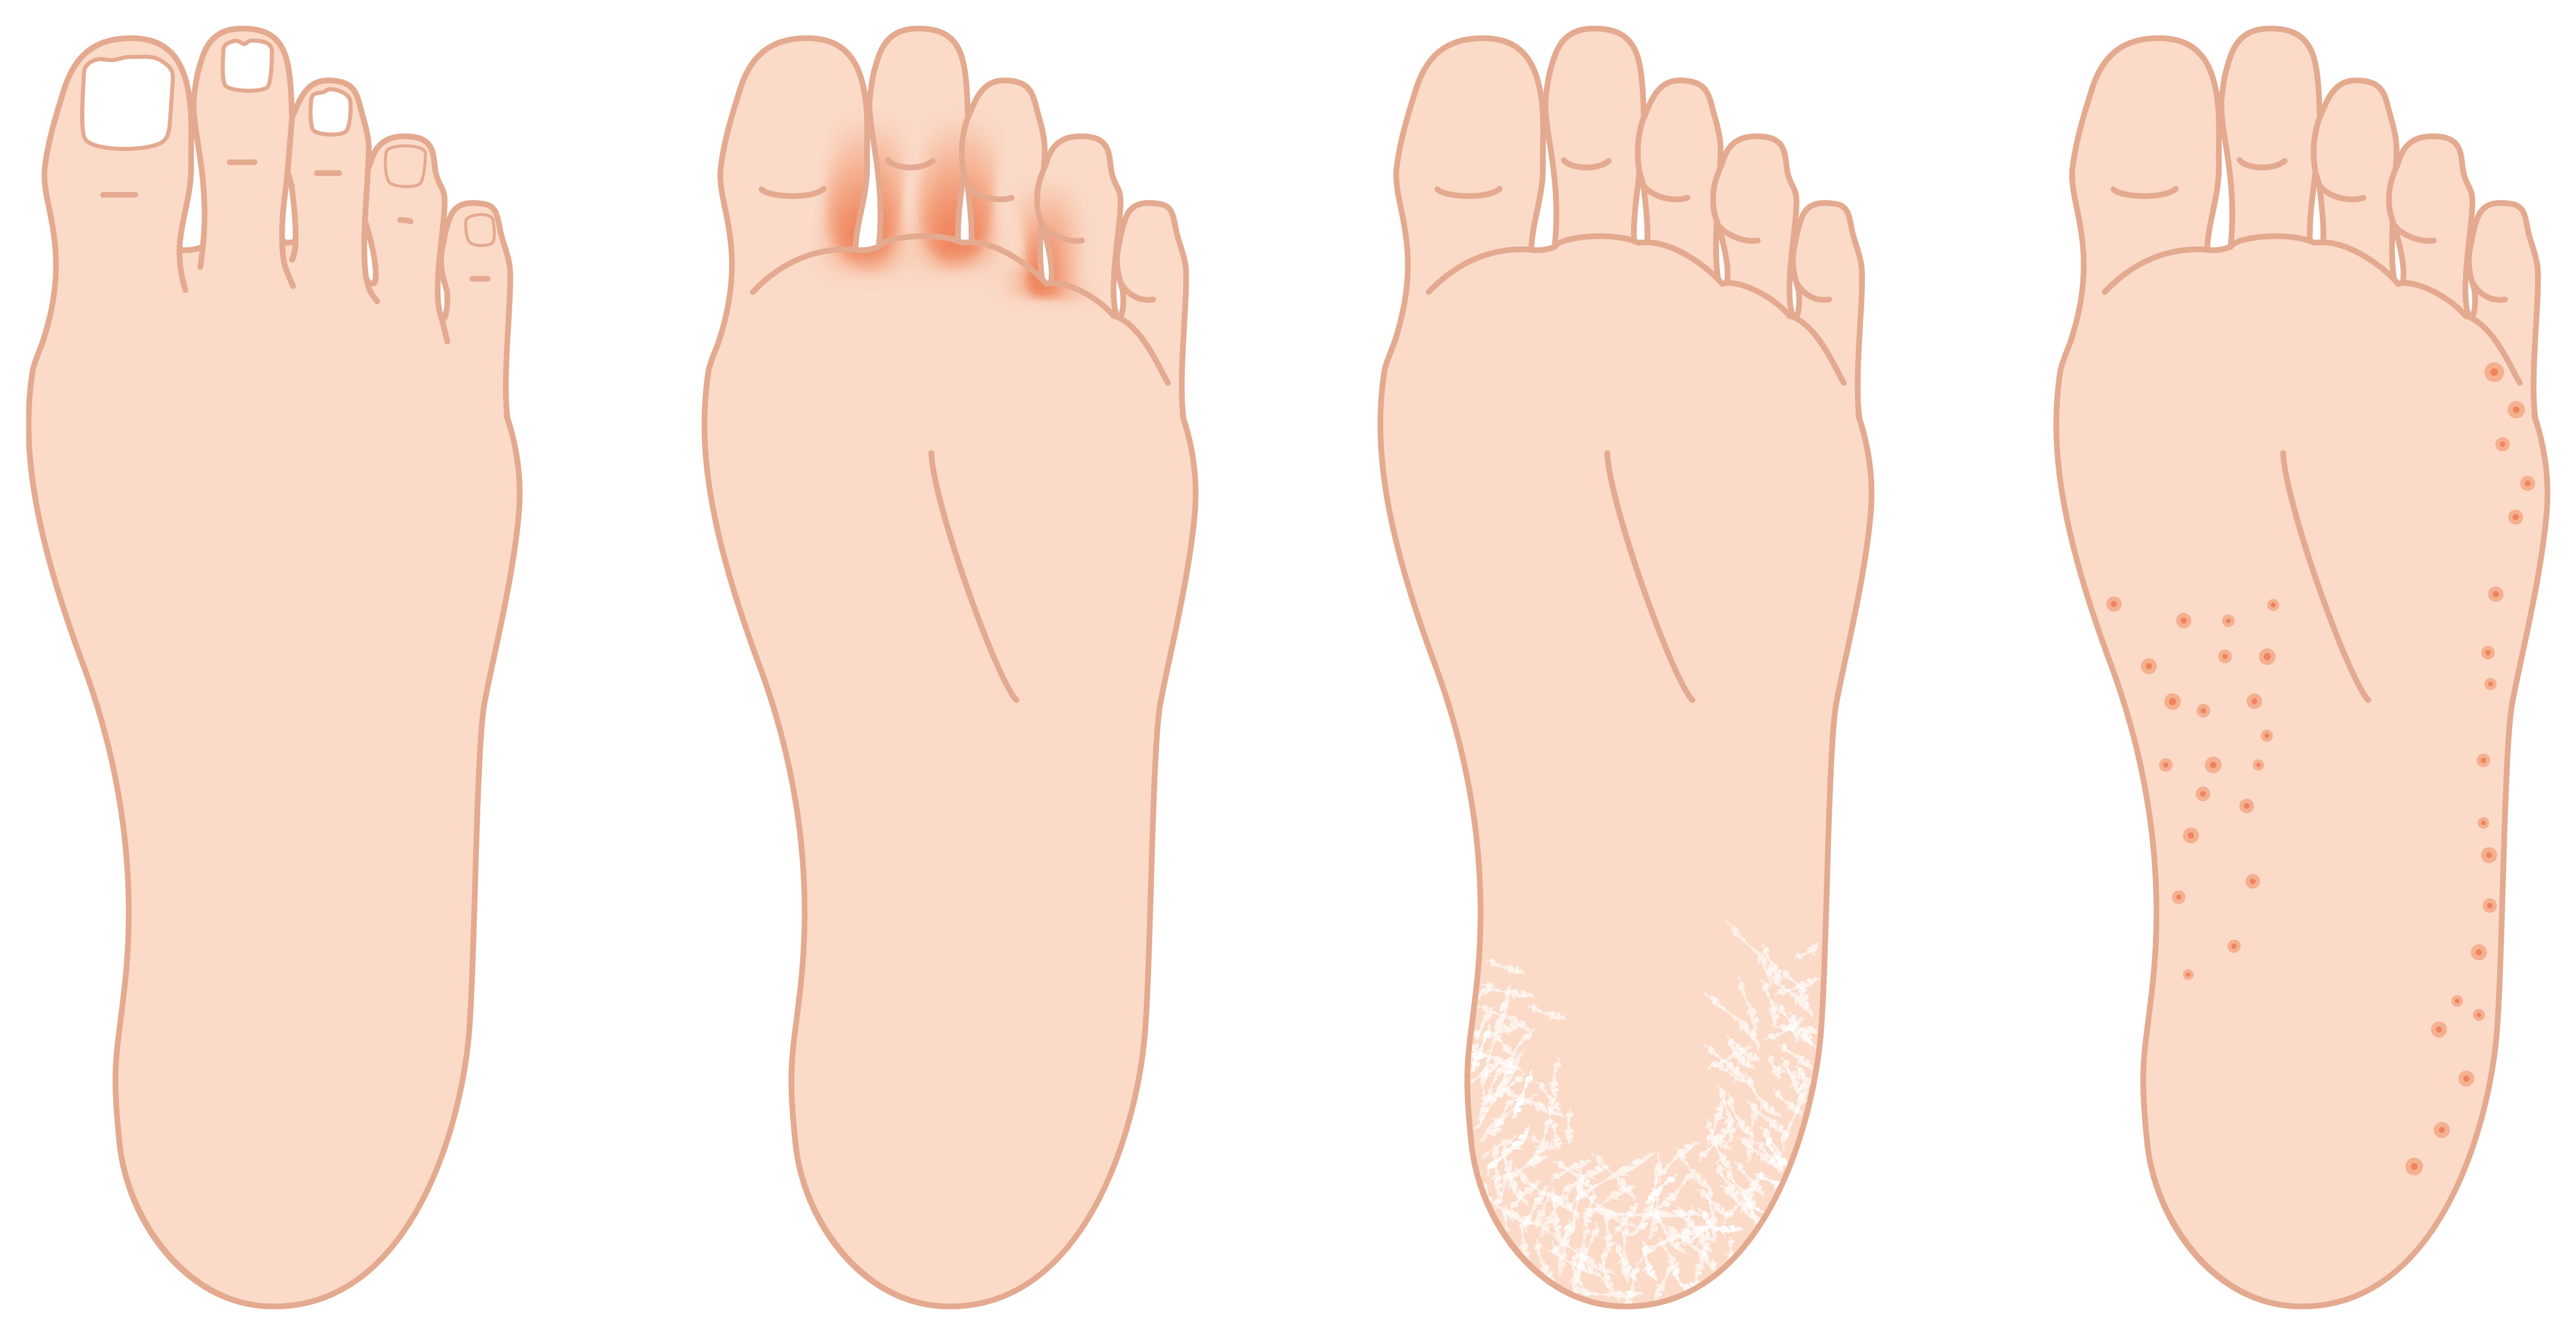 Foot infections: What causes them?